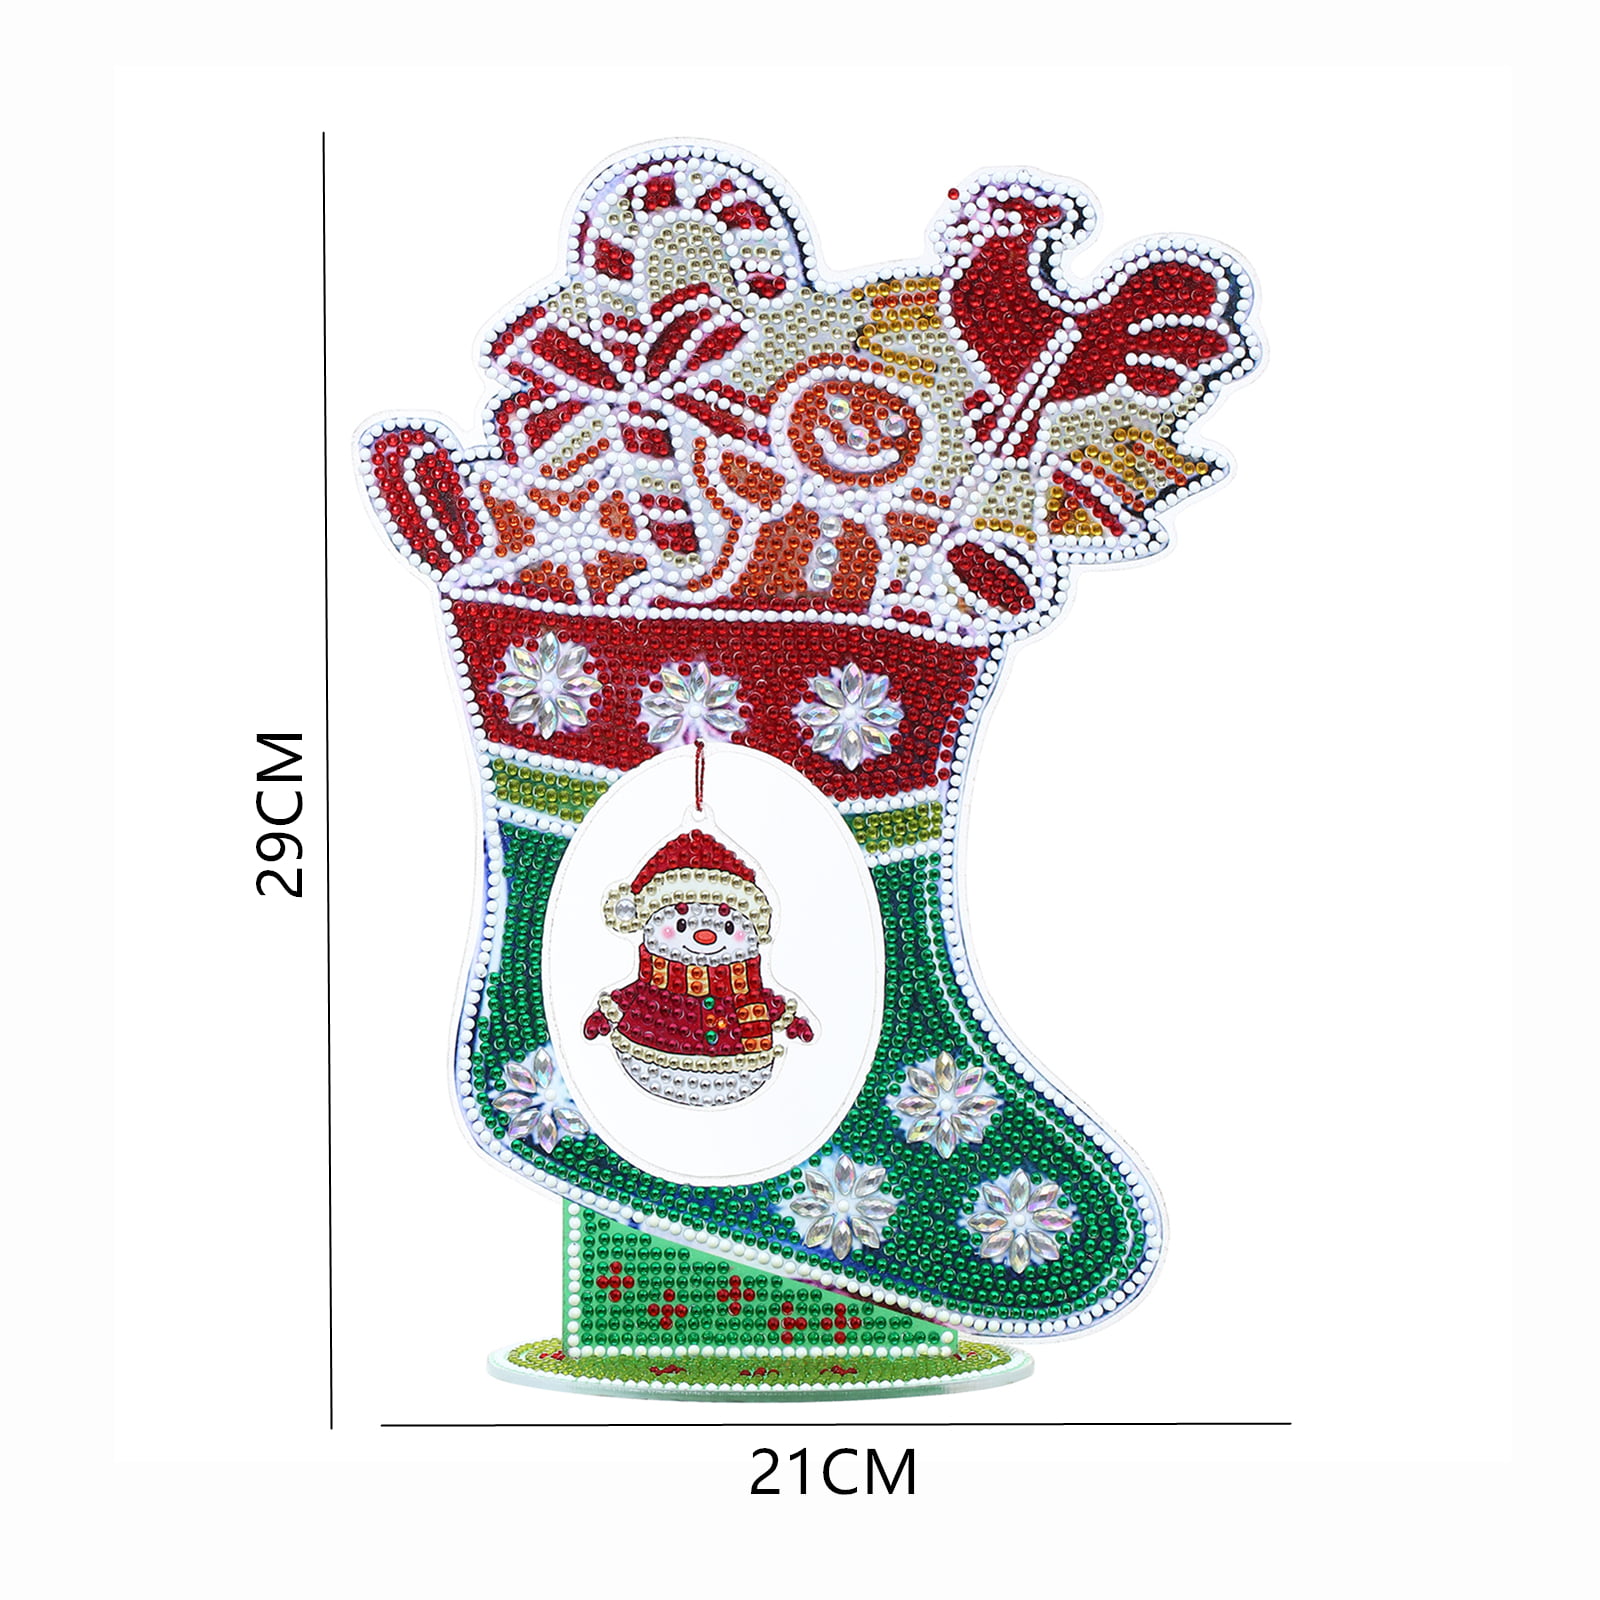  Snowman Diamond Art Tabletop Ornaments Kit 5D DIY Diamond  Painting Christmas Table Decorations Special Shaped Beads by Number Cross  Stitch Mosaic Arts Crafts Home Office Christmas Desktop Decor